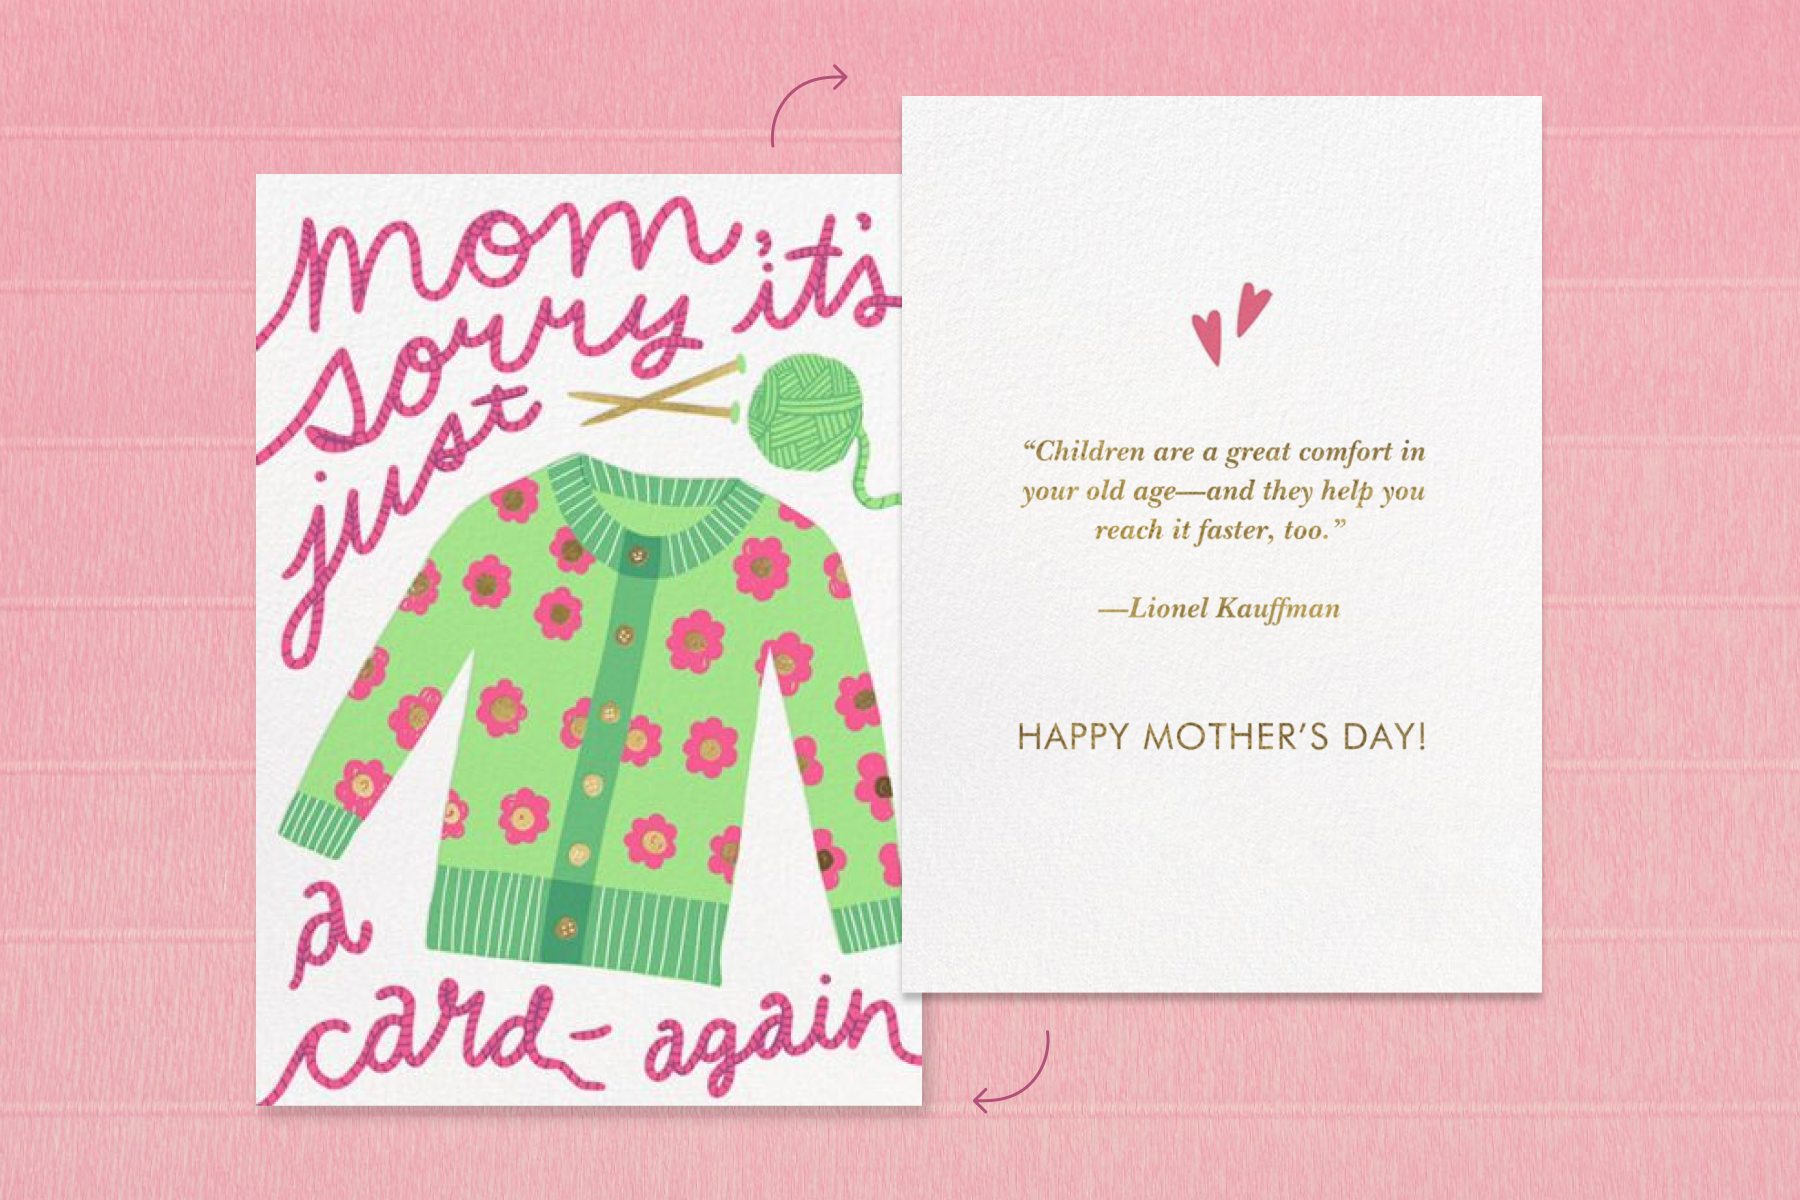 An illustrated sweater Mother’s Day card showing one of the messages suggested below. The card reads “Mom, sorry it’s just a card—again.”